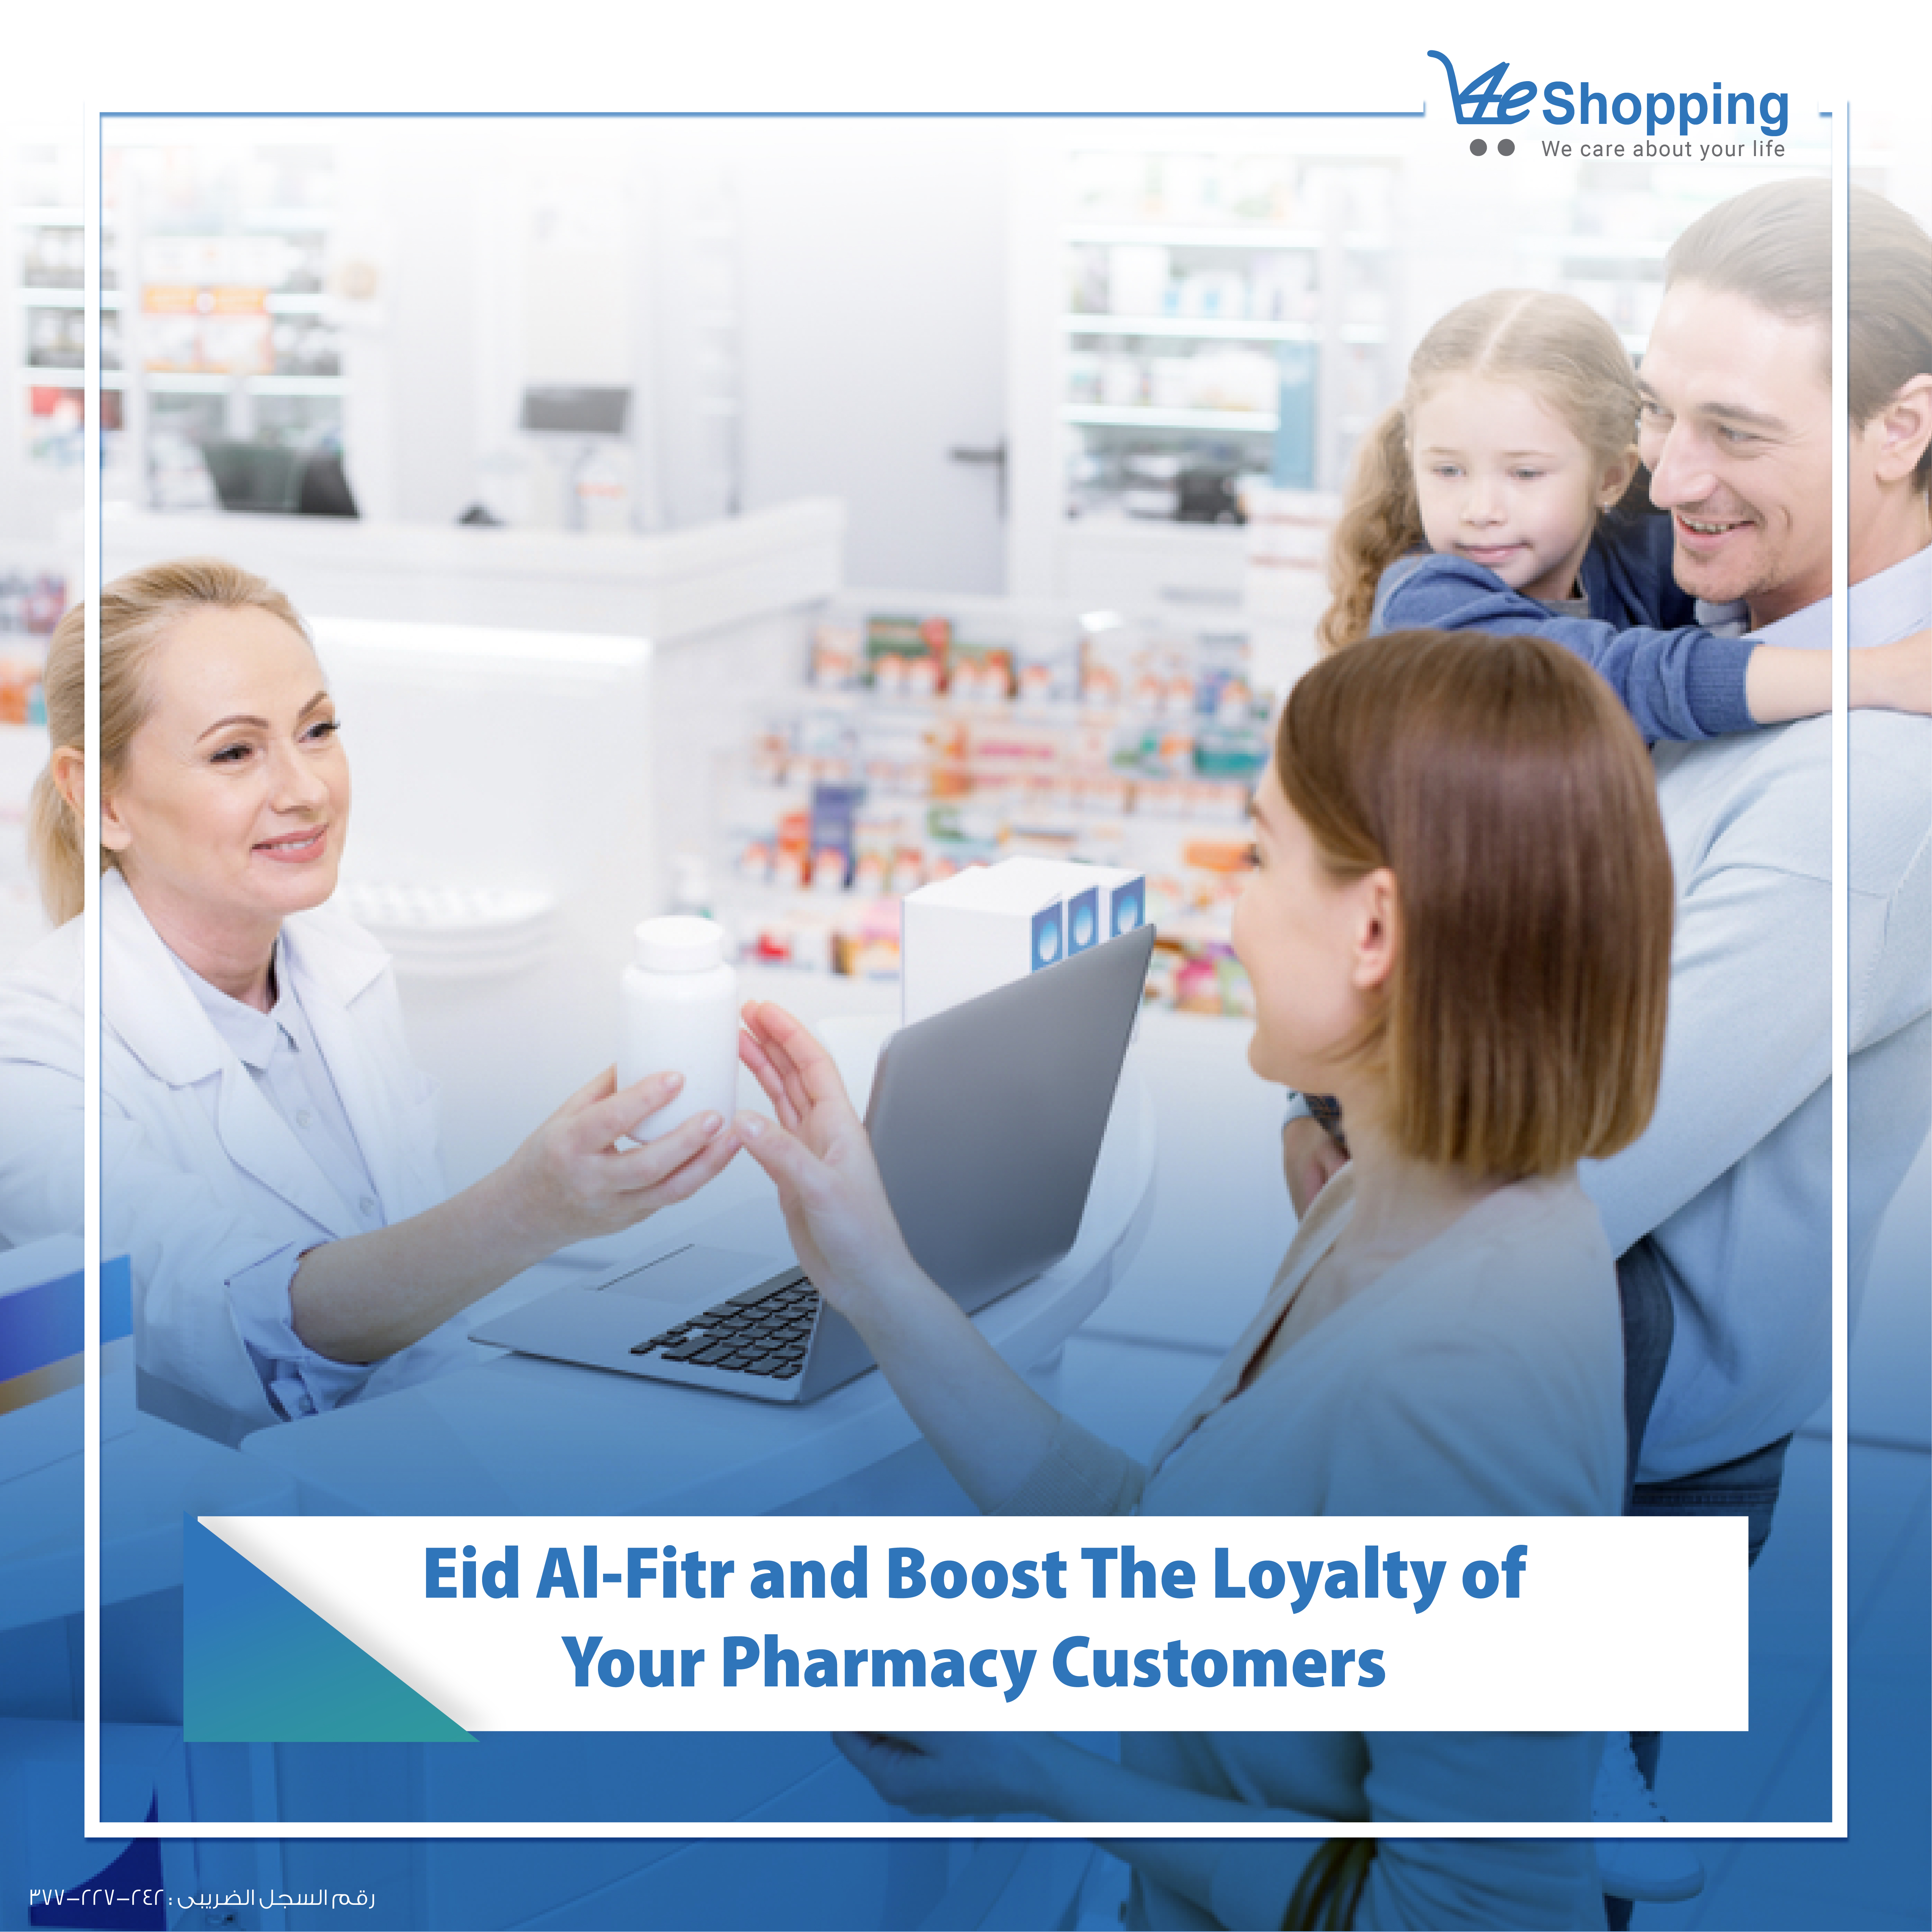 Eid al-Fitr and boost the loyalty of your pharmacy customers